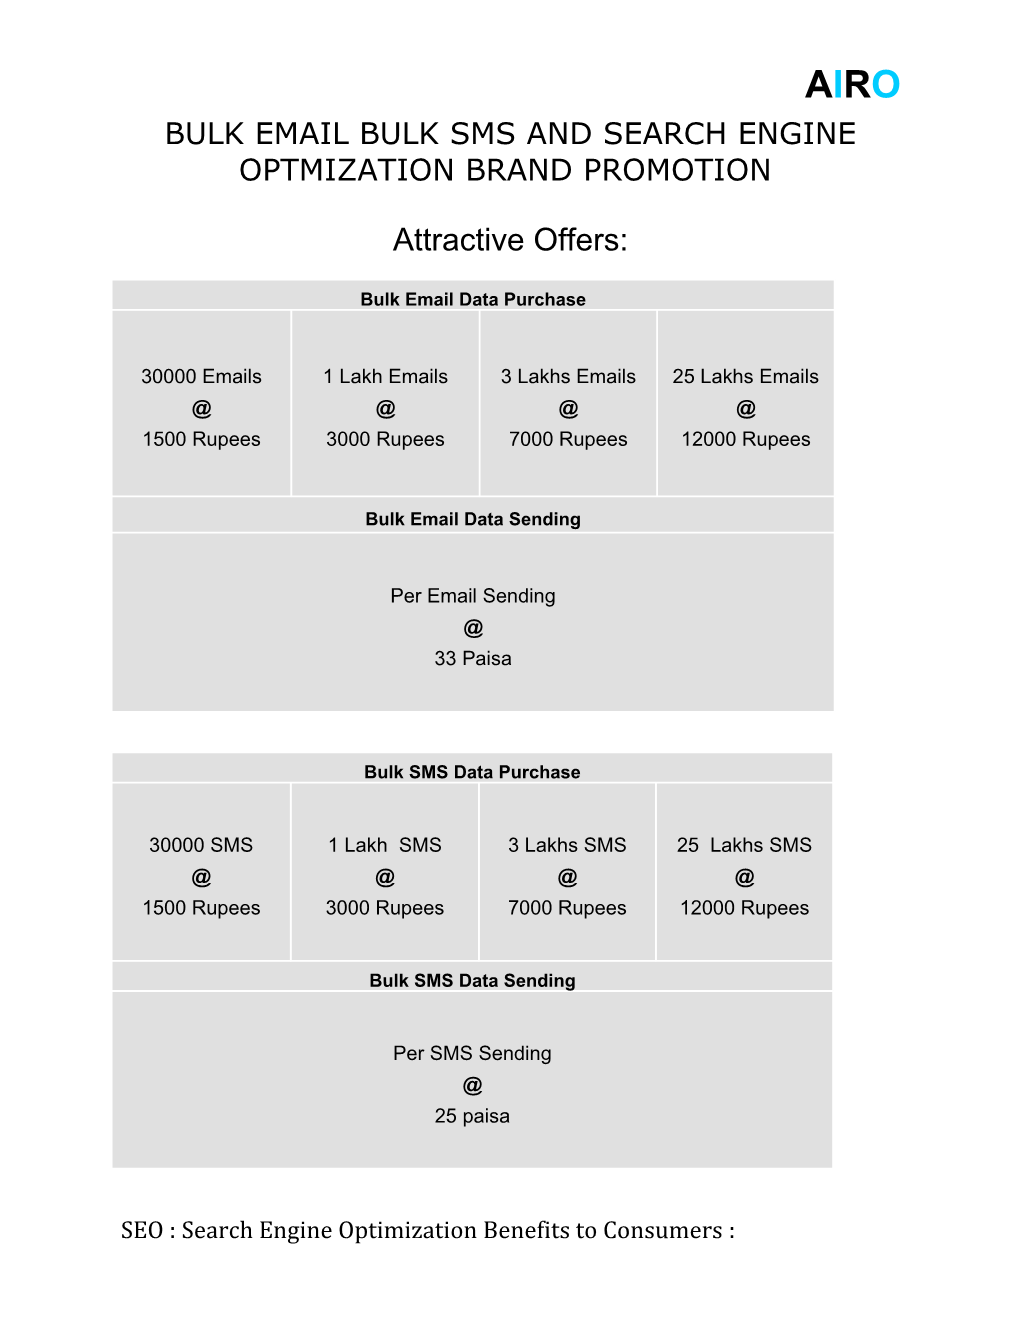 Bulk Email Bulk Sms and Search Engine Optmization Brand Promotion